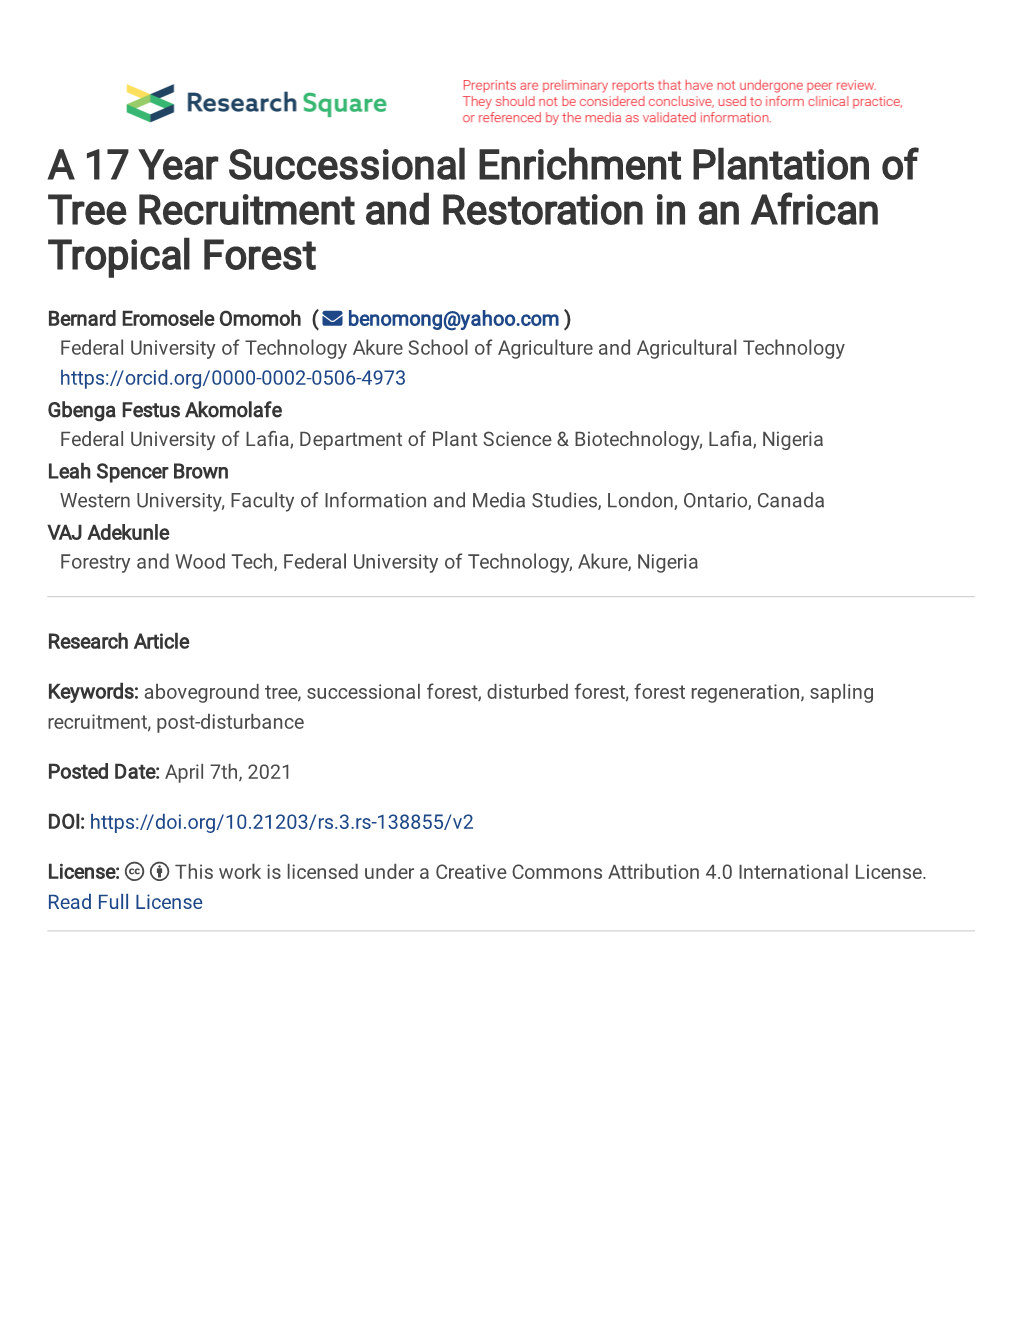 A 17 Year Successional Enrichment Plantation of Tree Recruitment and Restoration in an African Tropical Forest